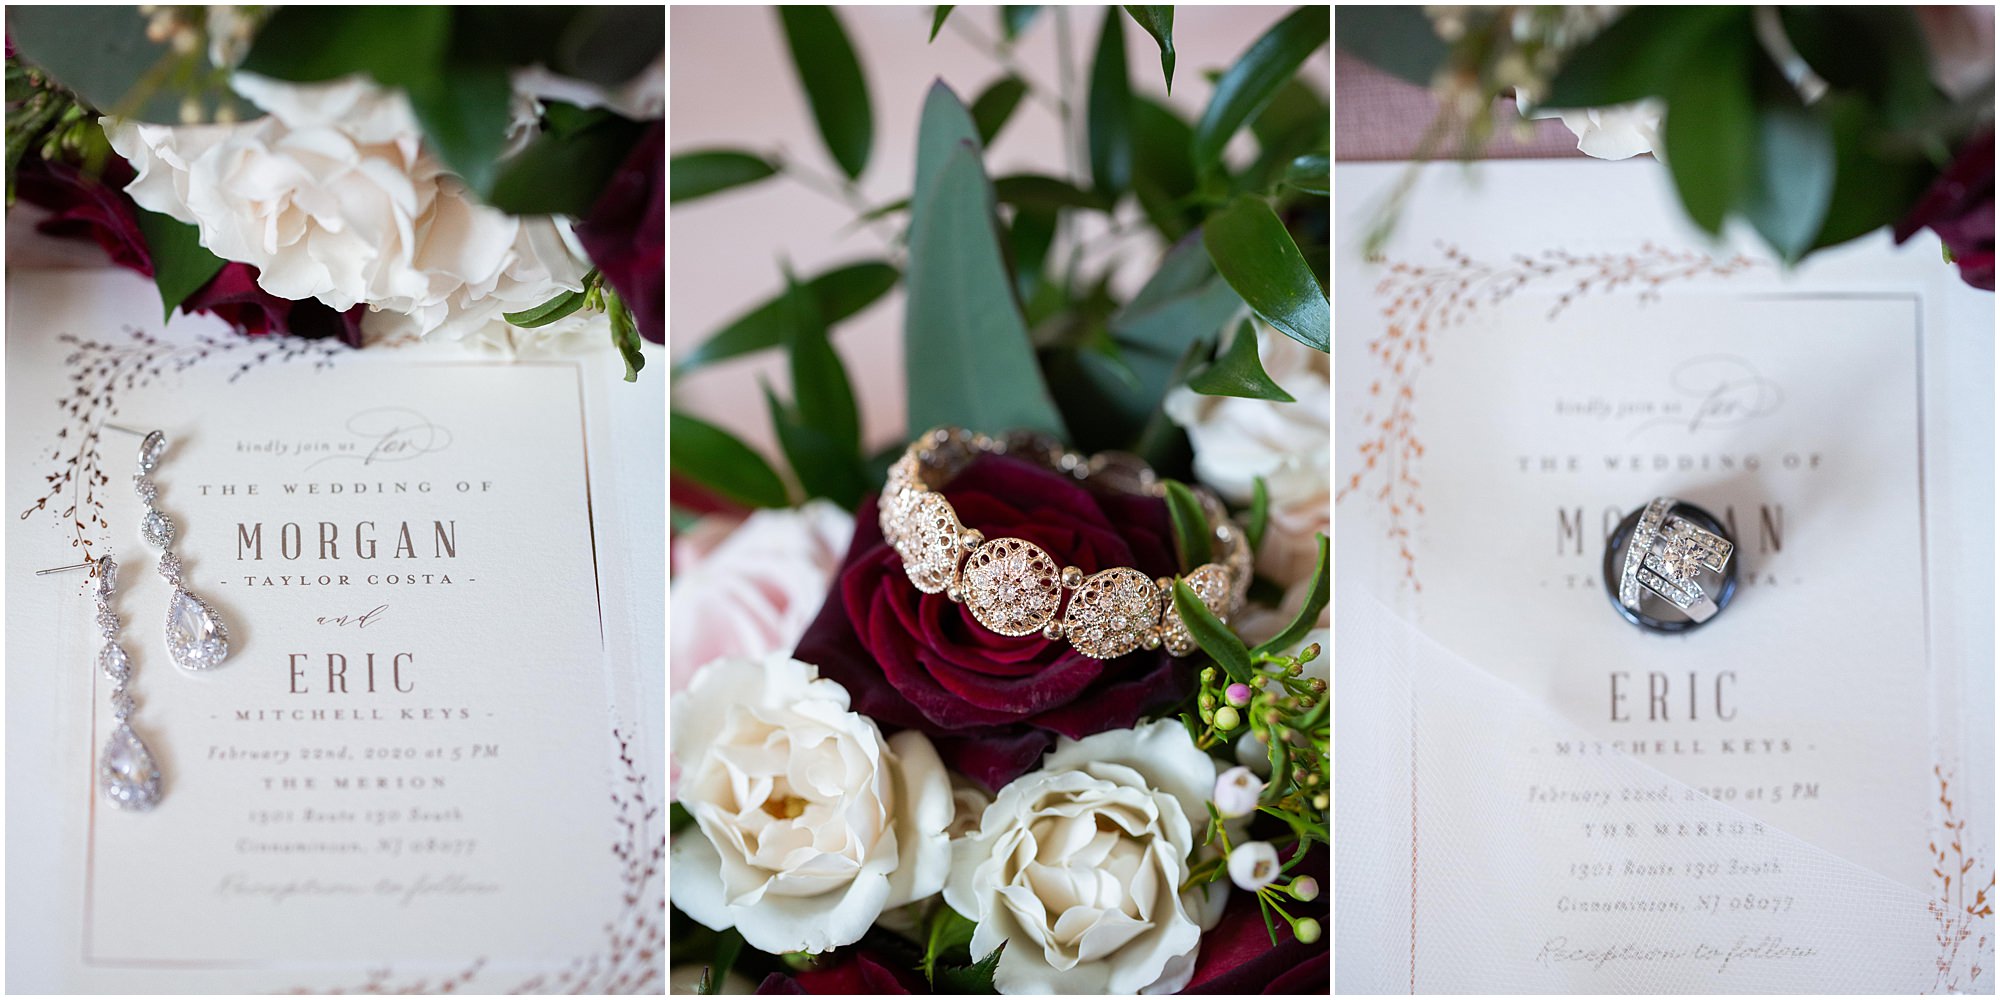 Bride's jewelry for winter wedding at the Merion